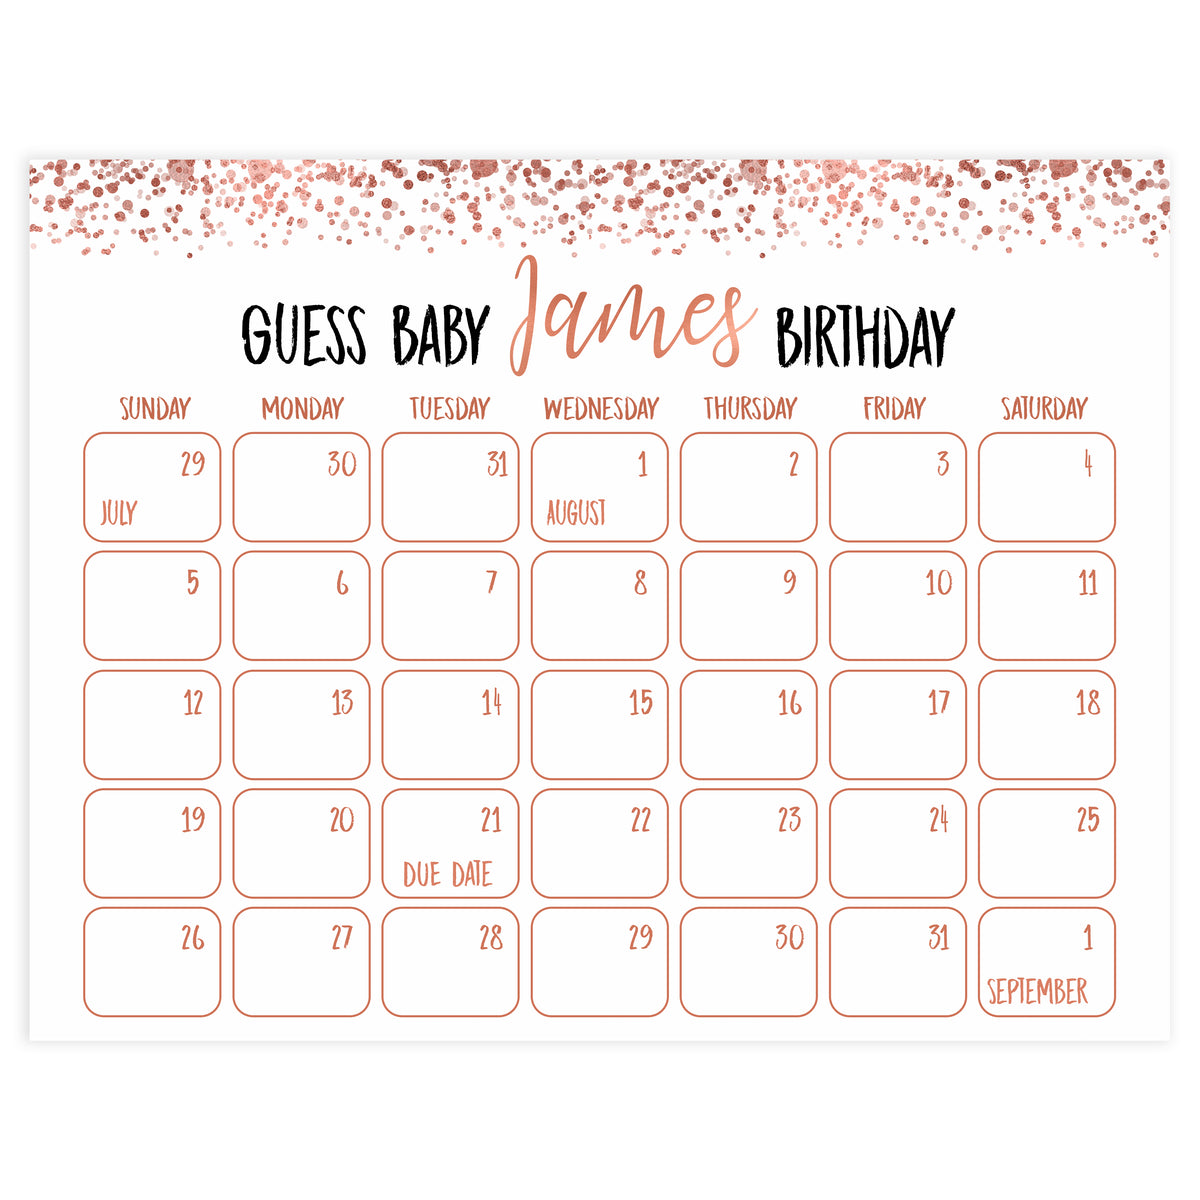 guess the baby birthday, rose gold baby games, rose gold baby shower, printable baby games, rose gold fun baby games, baby birthday game